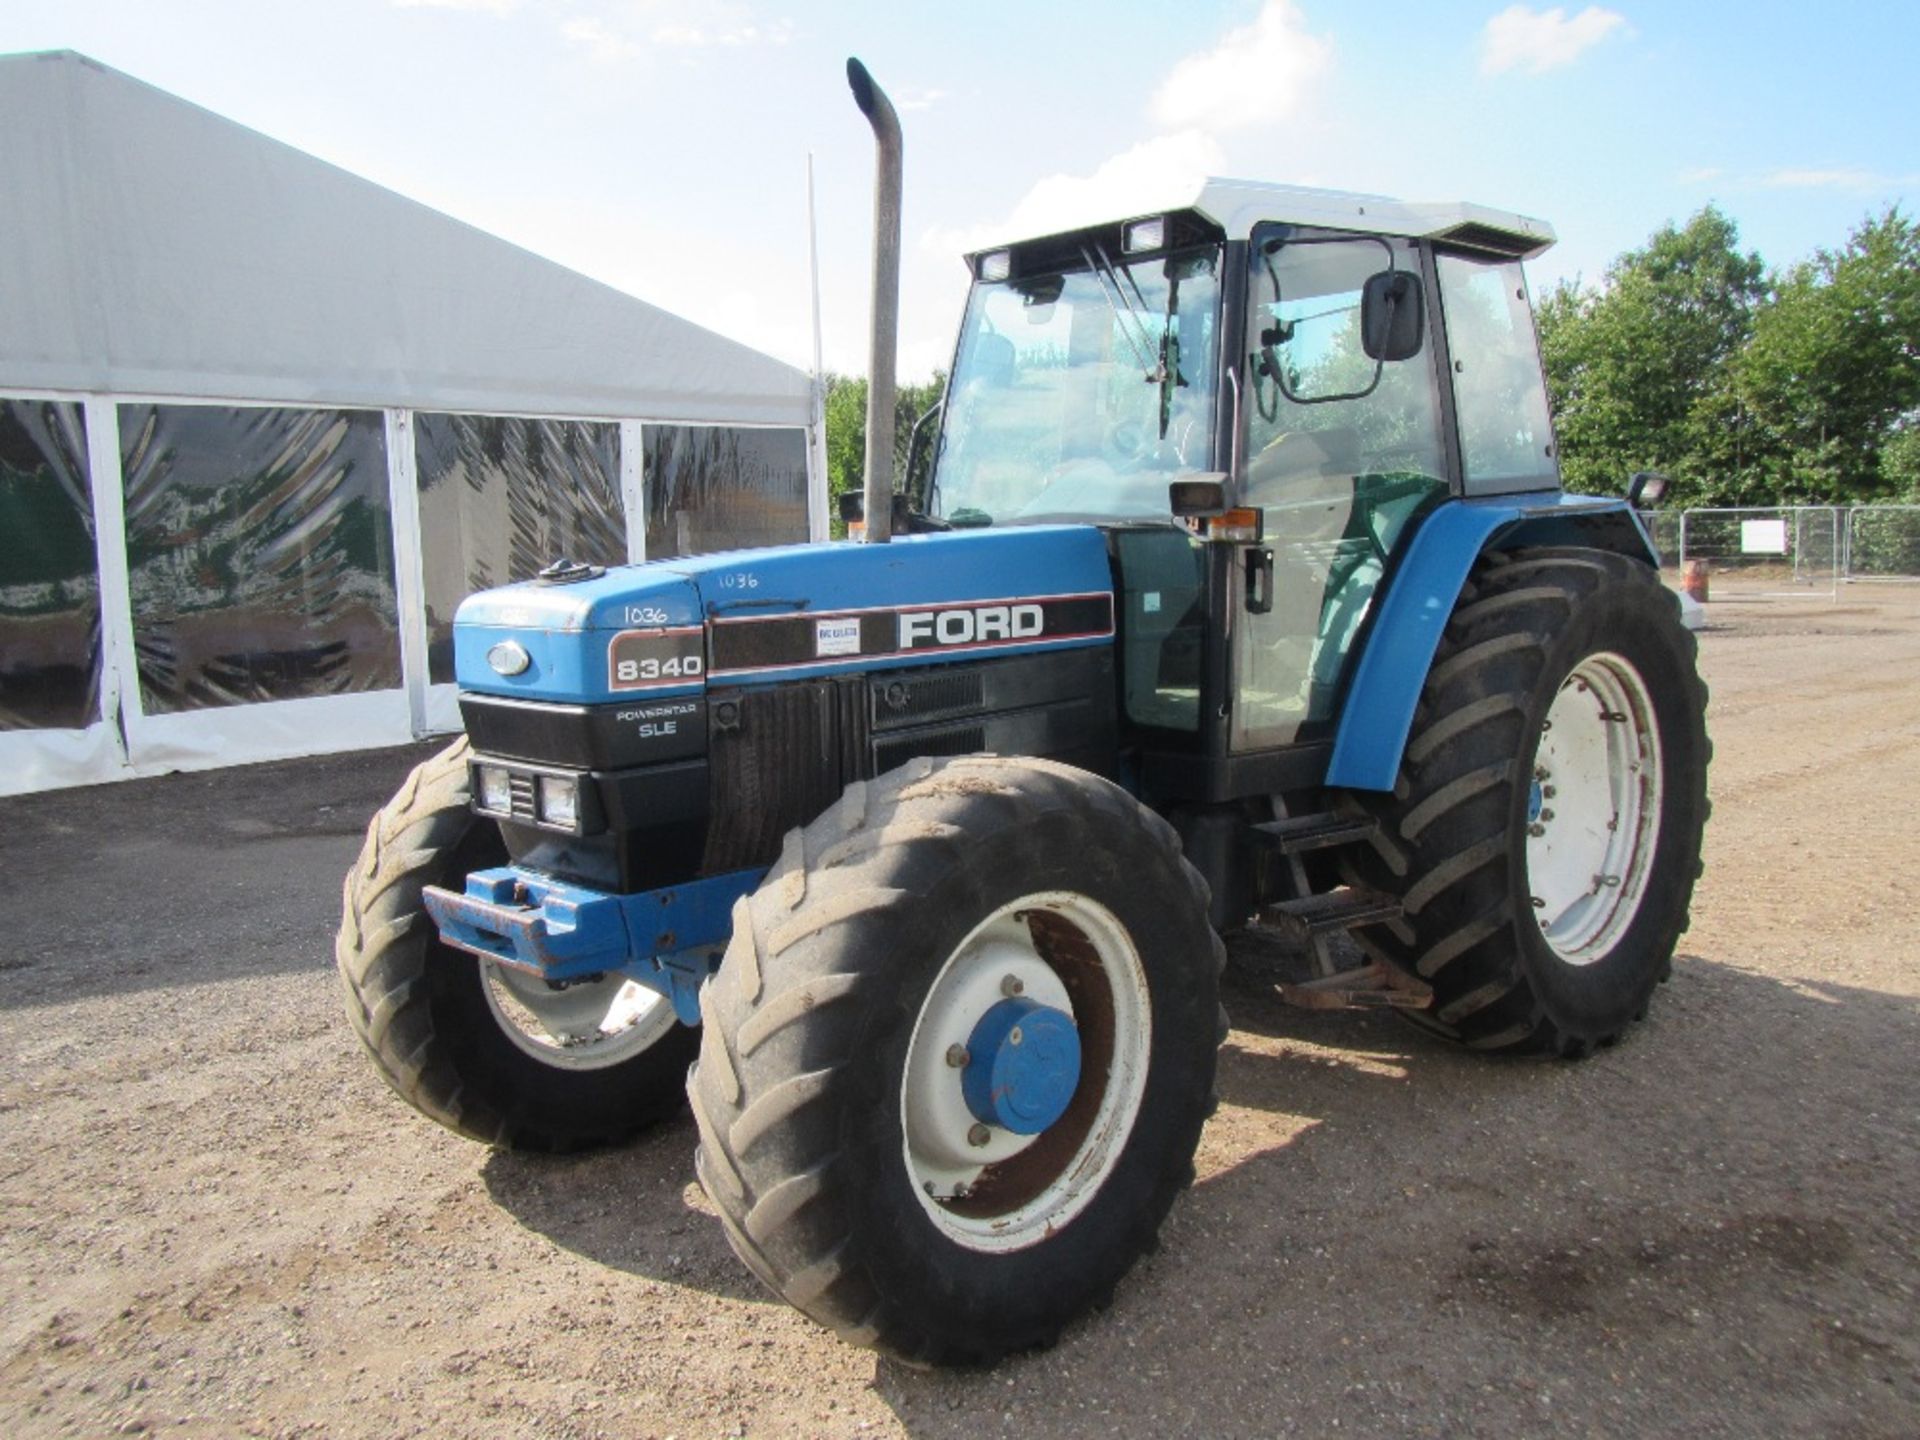 Ford New Holland 8340 SLE 40k Tractor with Air Con. Reg. No. M229 JLJ Ser No BD85370